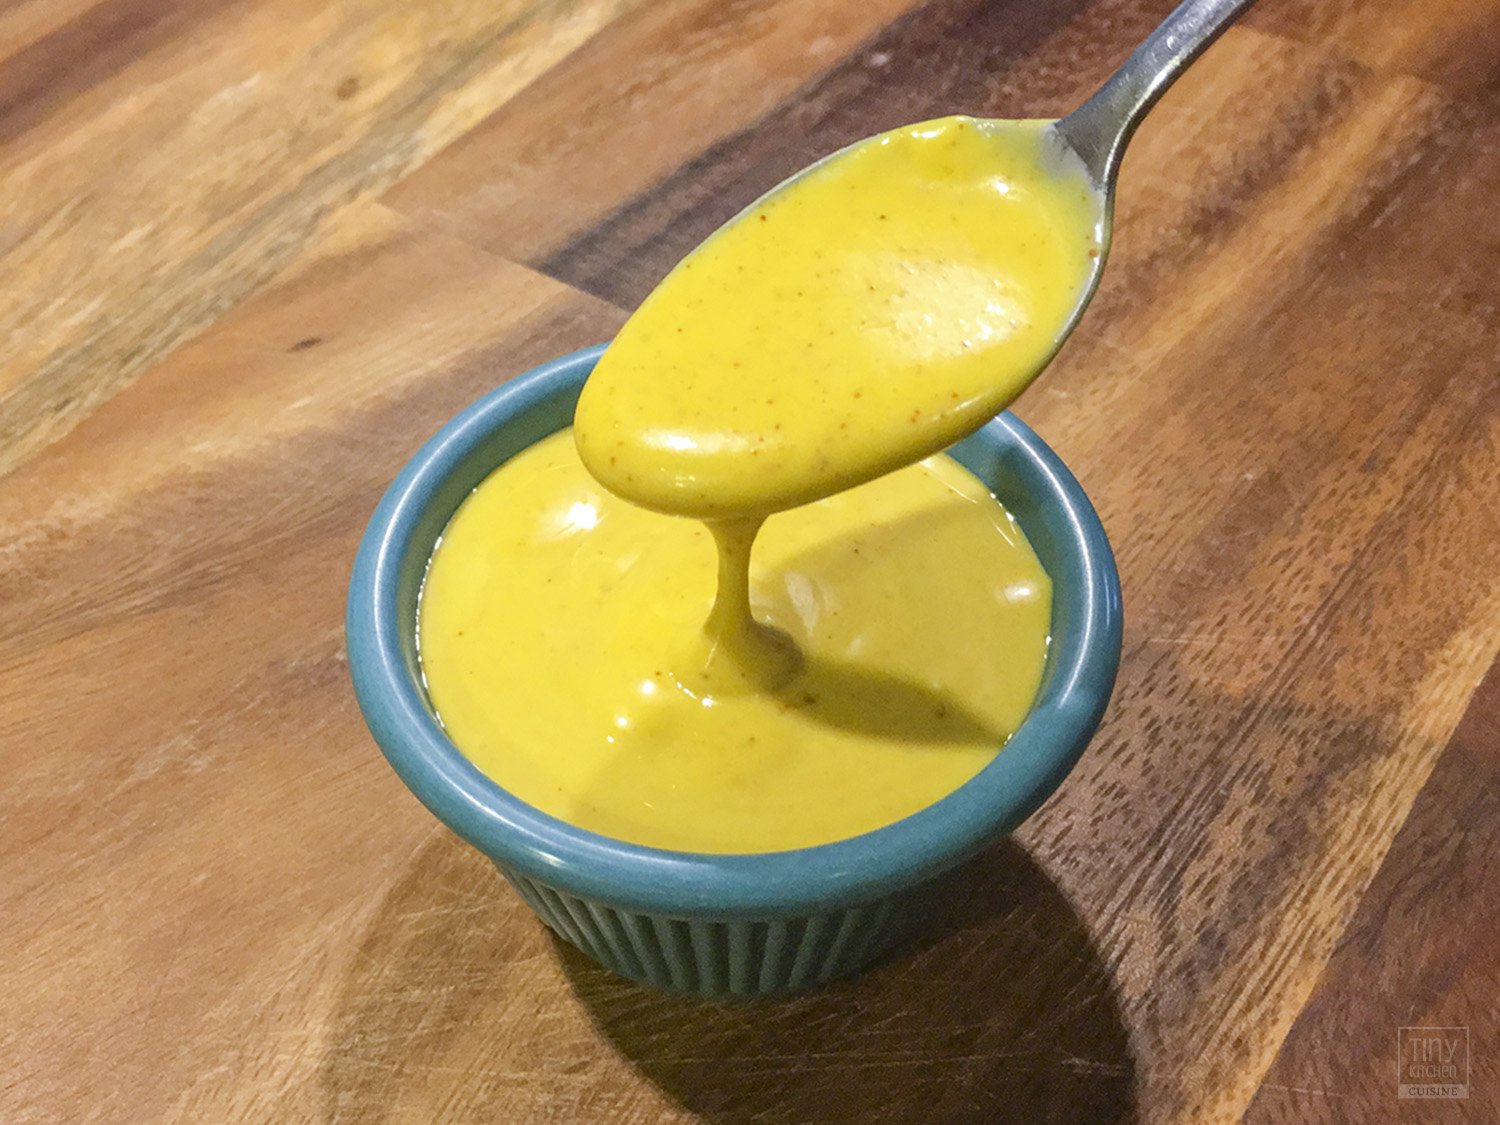 Honey Mustard Sauce Recipe for Dipping or Dressing - Homemade in just 2 minutes! | Tiny Kitchen Cuisine | https://tiny.kitchen